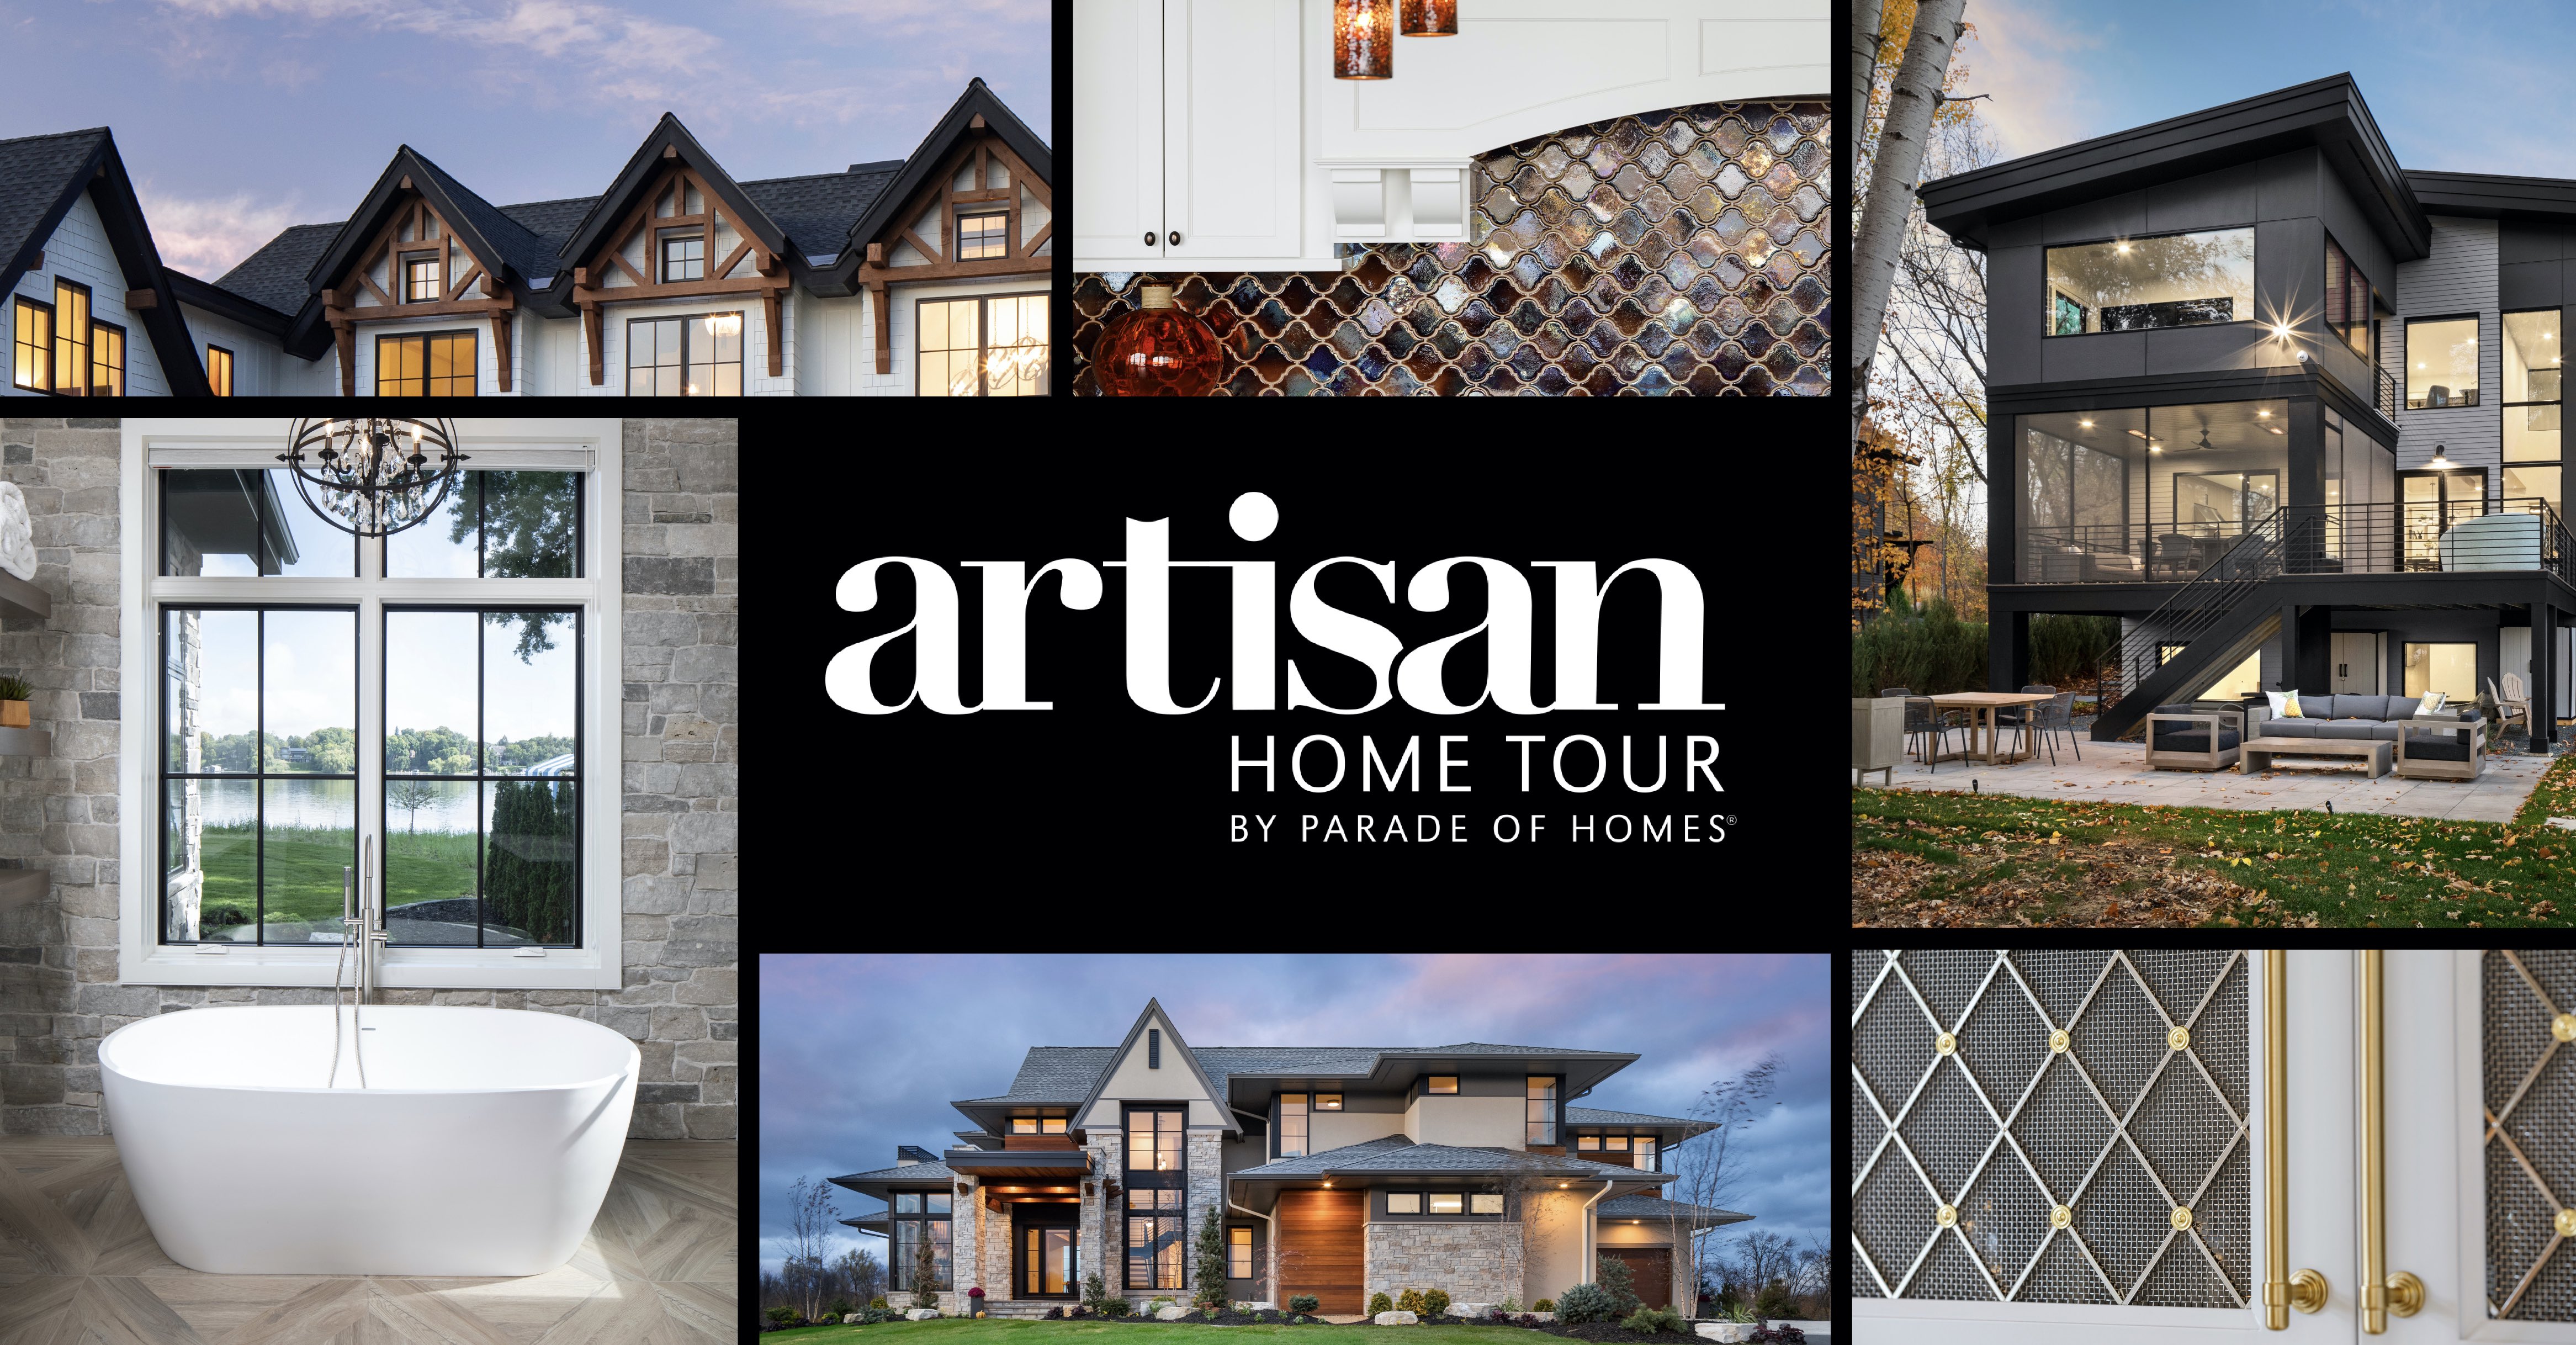 Image for Facts About the 2021 Artisan Home Tour by Parade of Homes